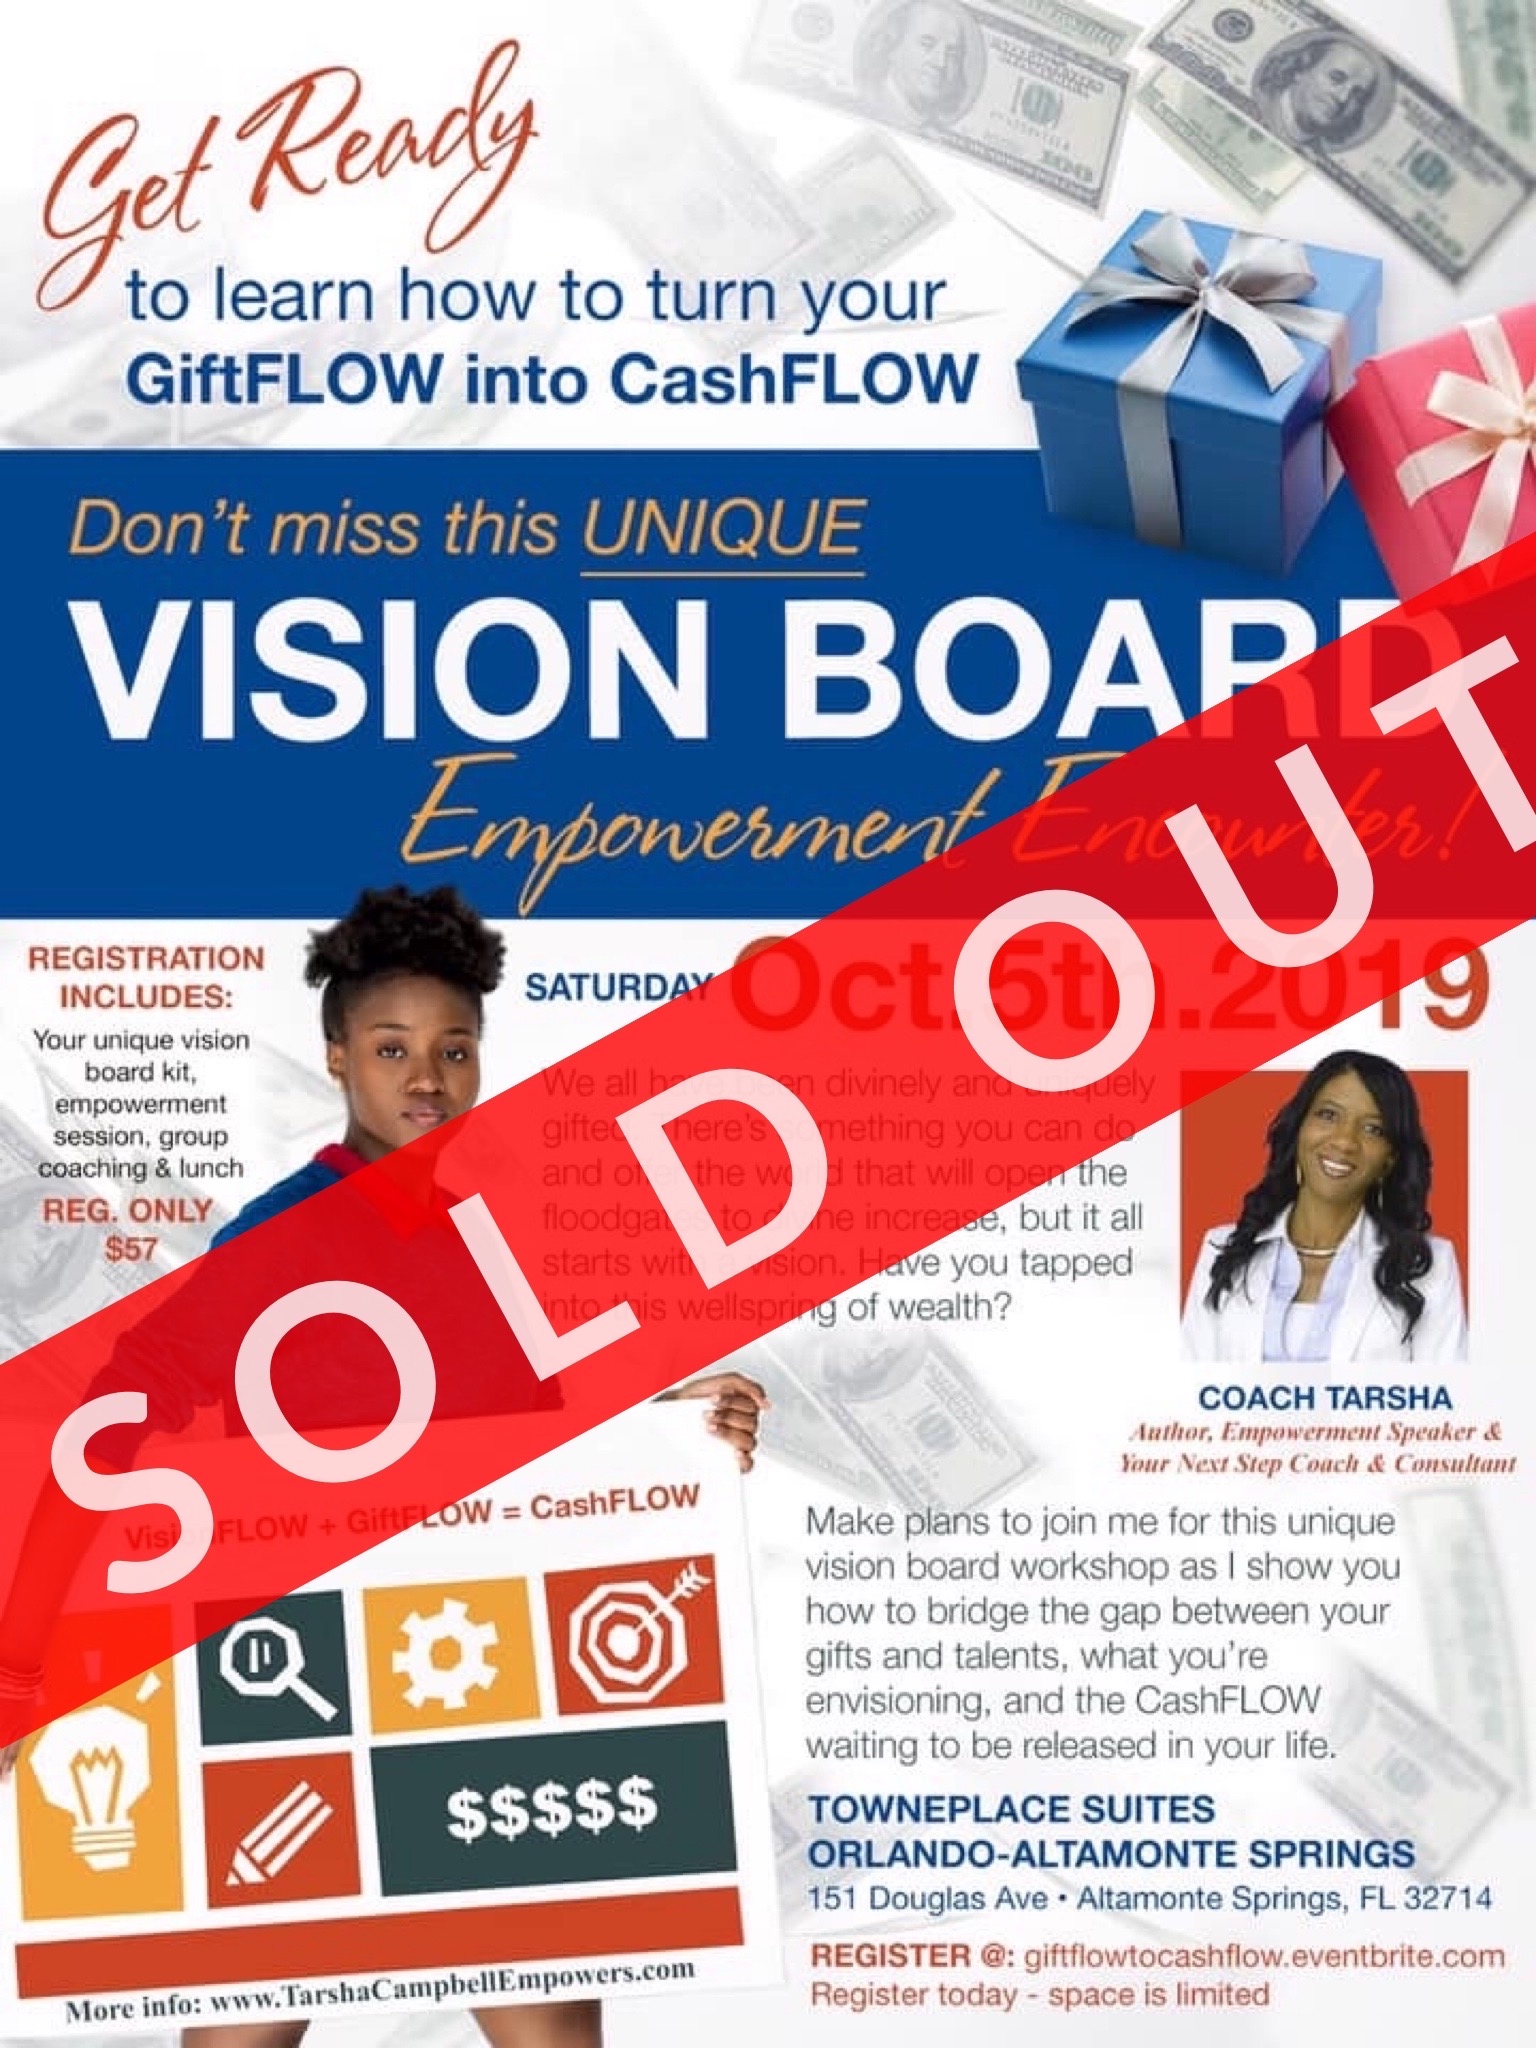 Sold out VBEE event